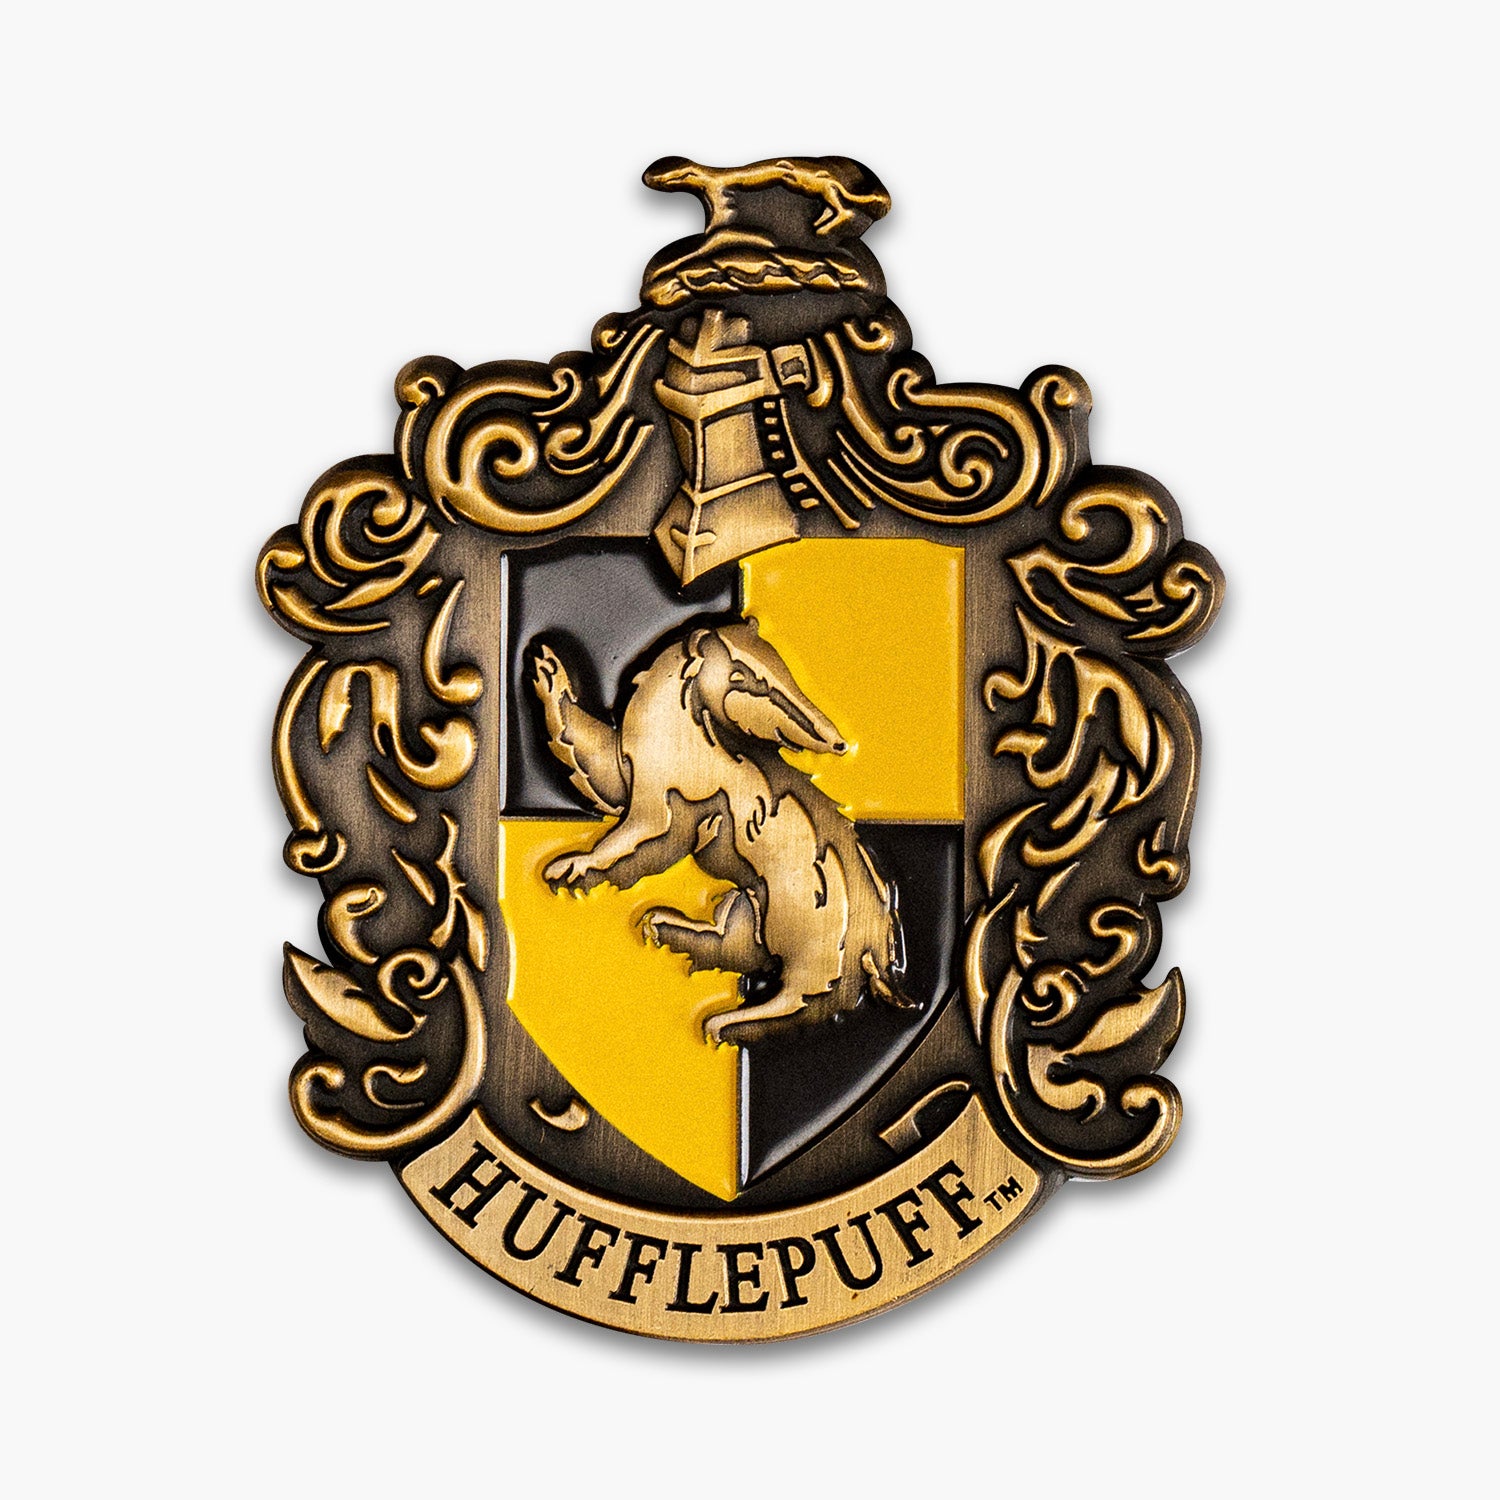 The Official Harry Potter Hufflepuff House Crest Shaped Coin